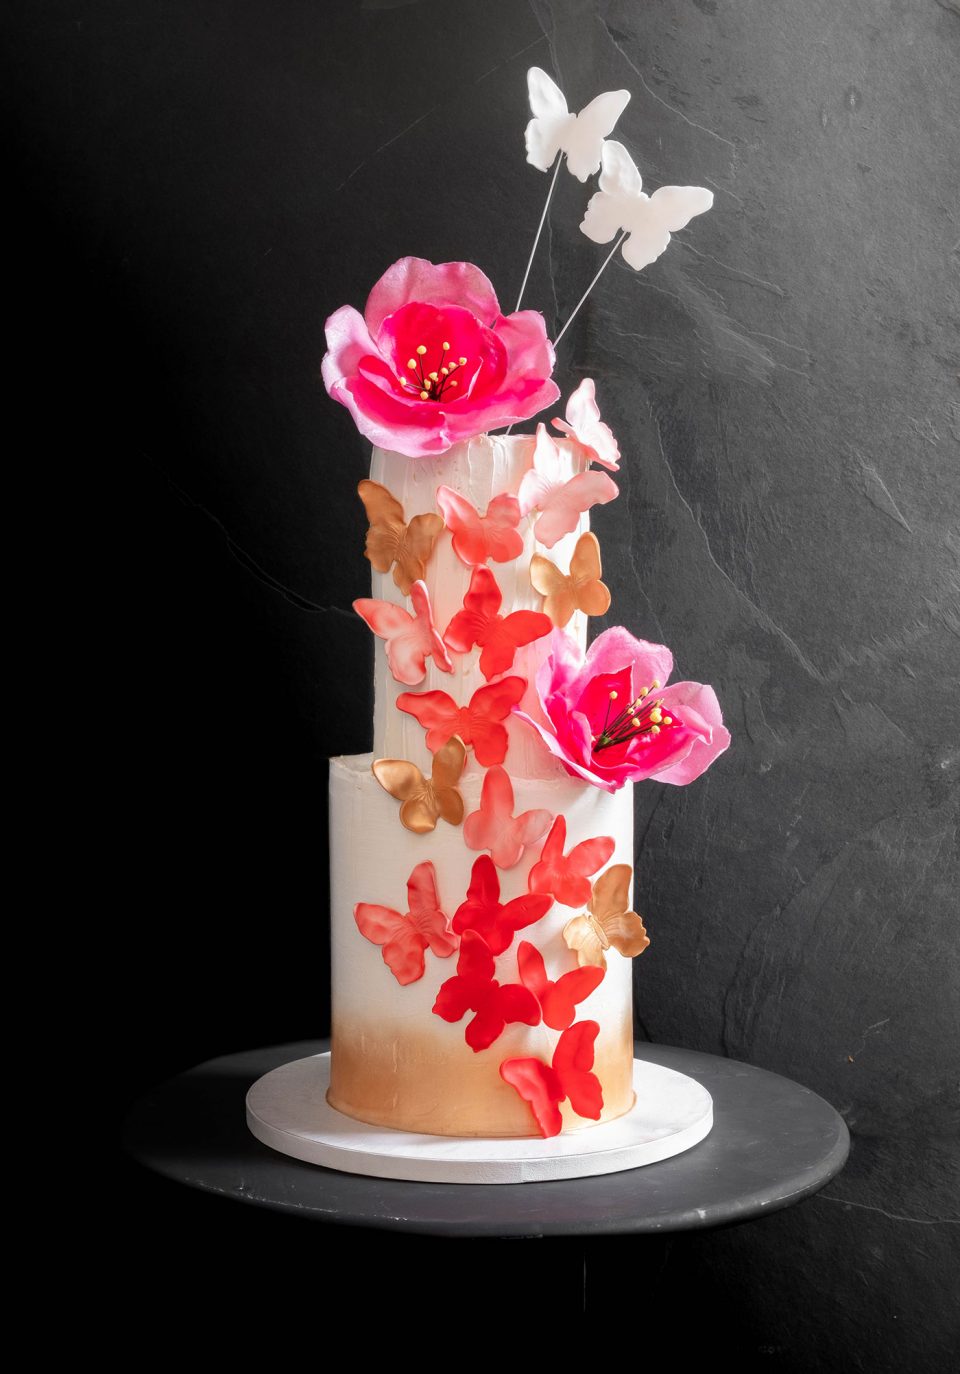 The Cake Maker Miri - The Cake Maker Dublin | Bakers and Cakers / Decorate your cakes to make them extra beautiful, and take photos so decorate your cakes with yummy frosting, delicious decorations & adorable toppers!